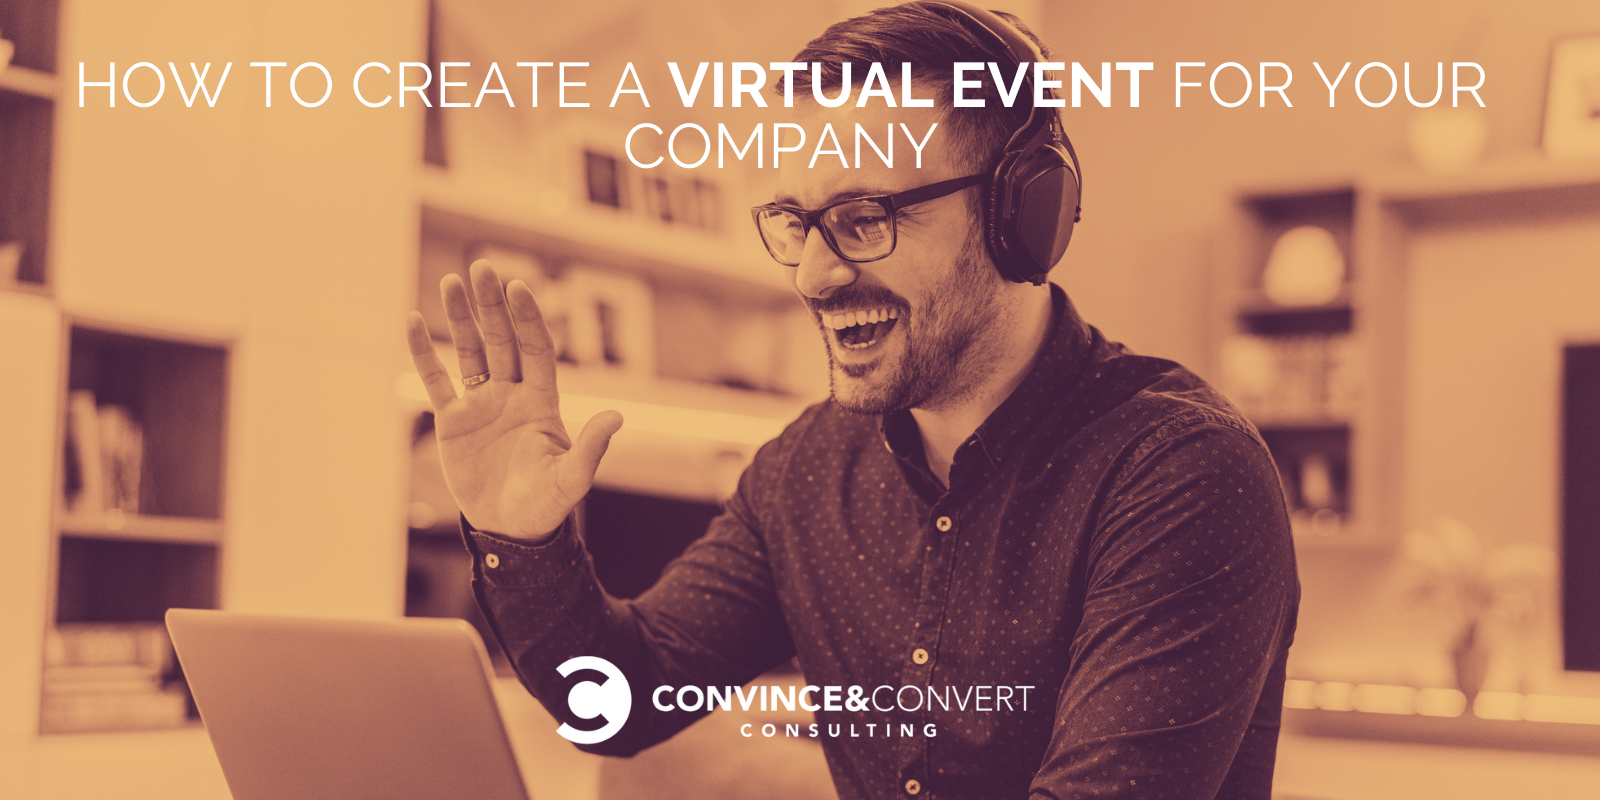 How to create a virtual event for your business